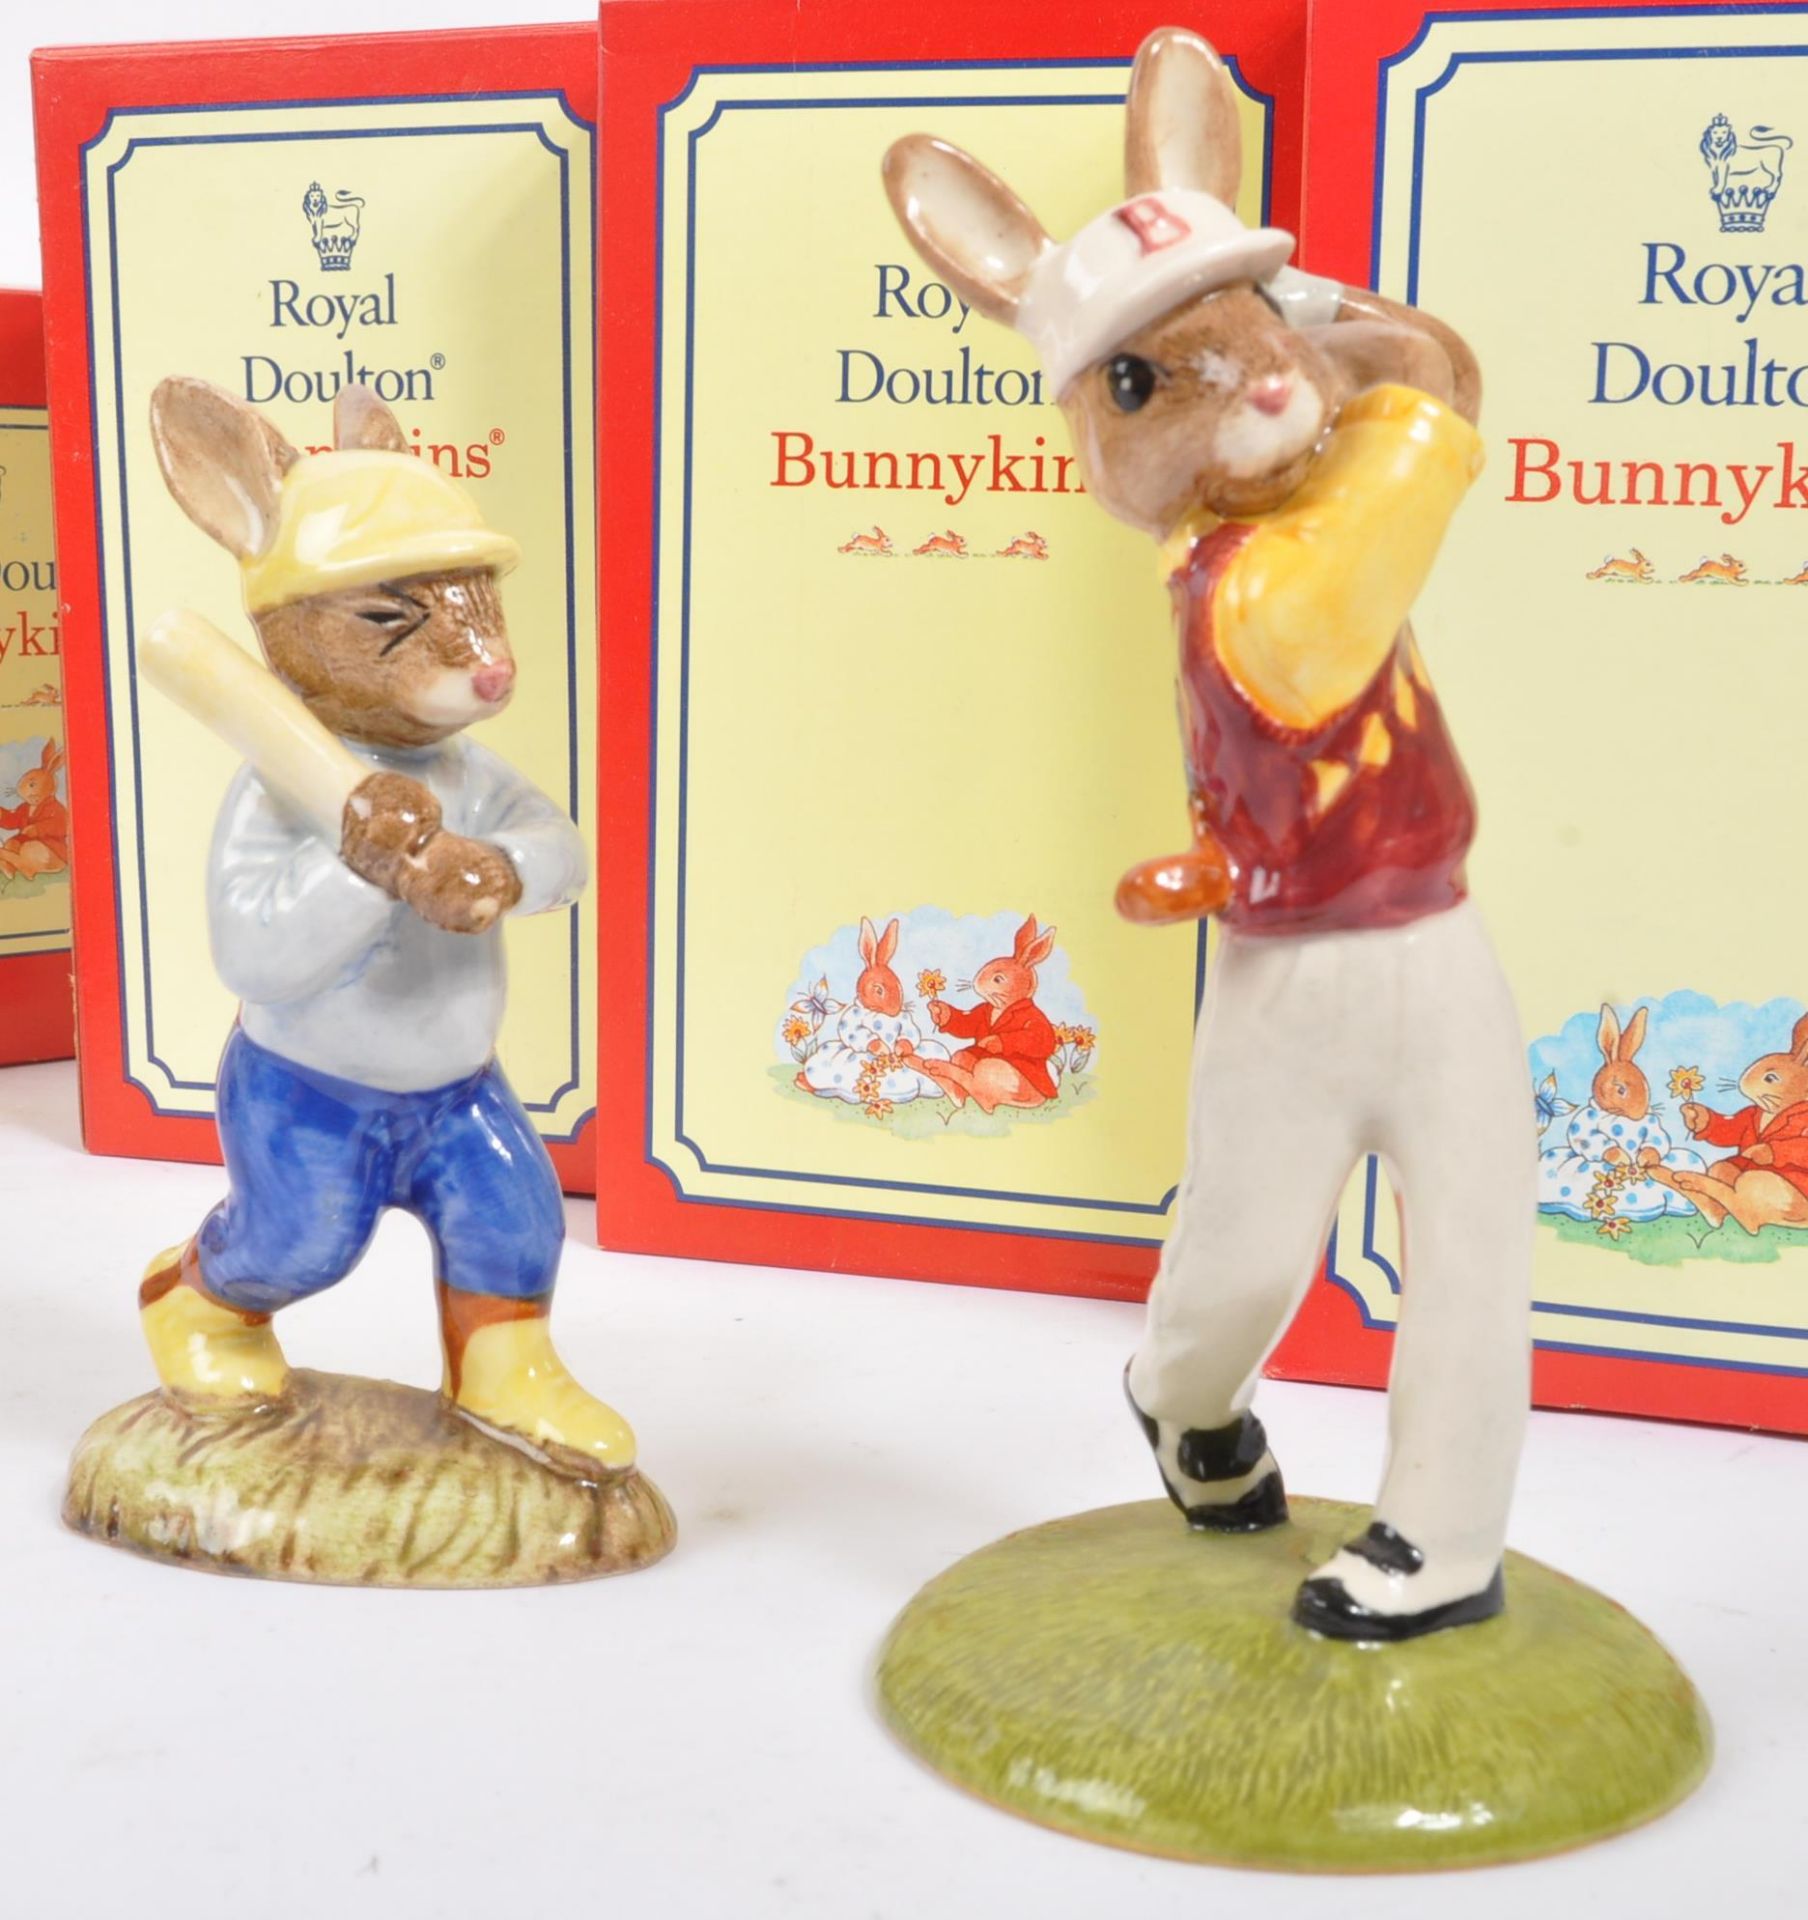 ROYAL DOULTON - BUNNYKINS - COLLECTION OF PORCELAIN FIGURES - Image 8 of 9